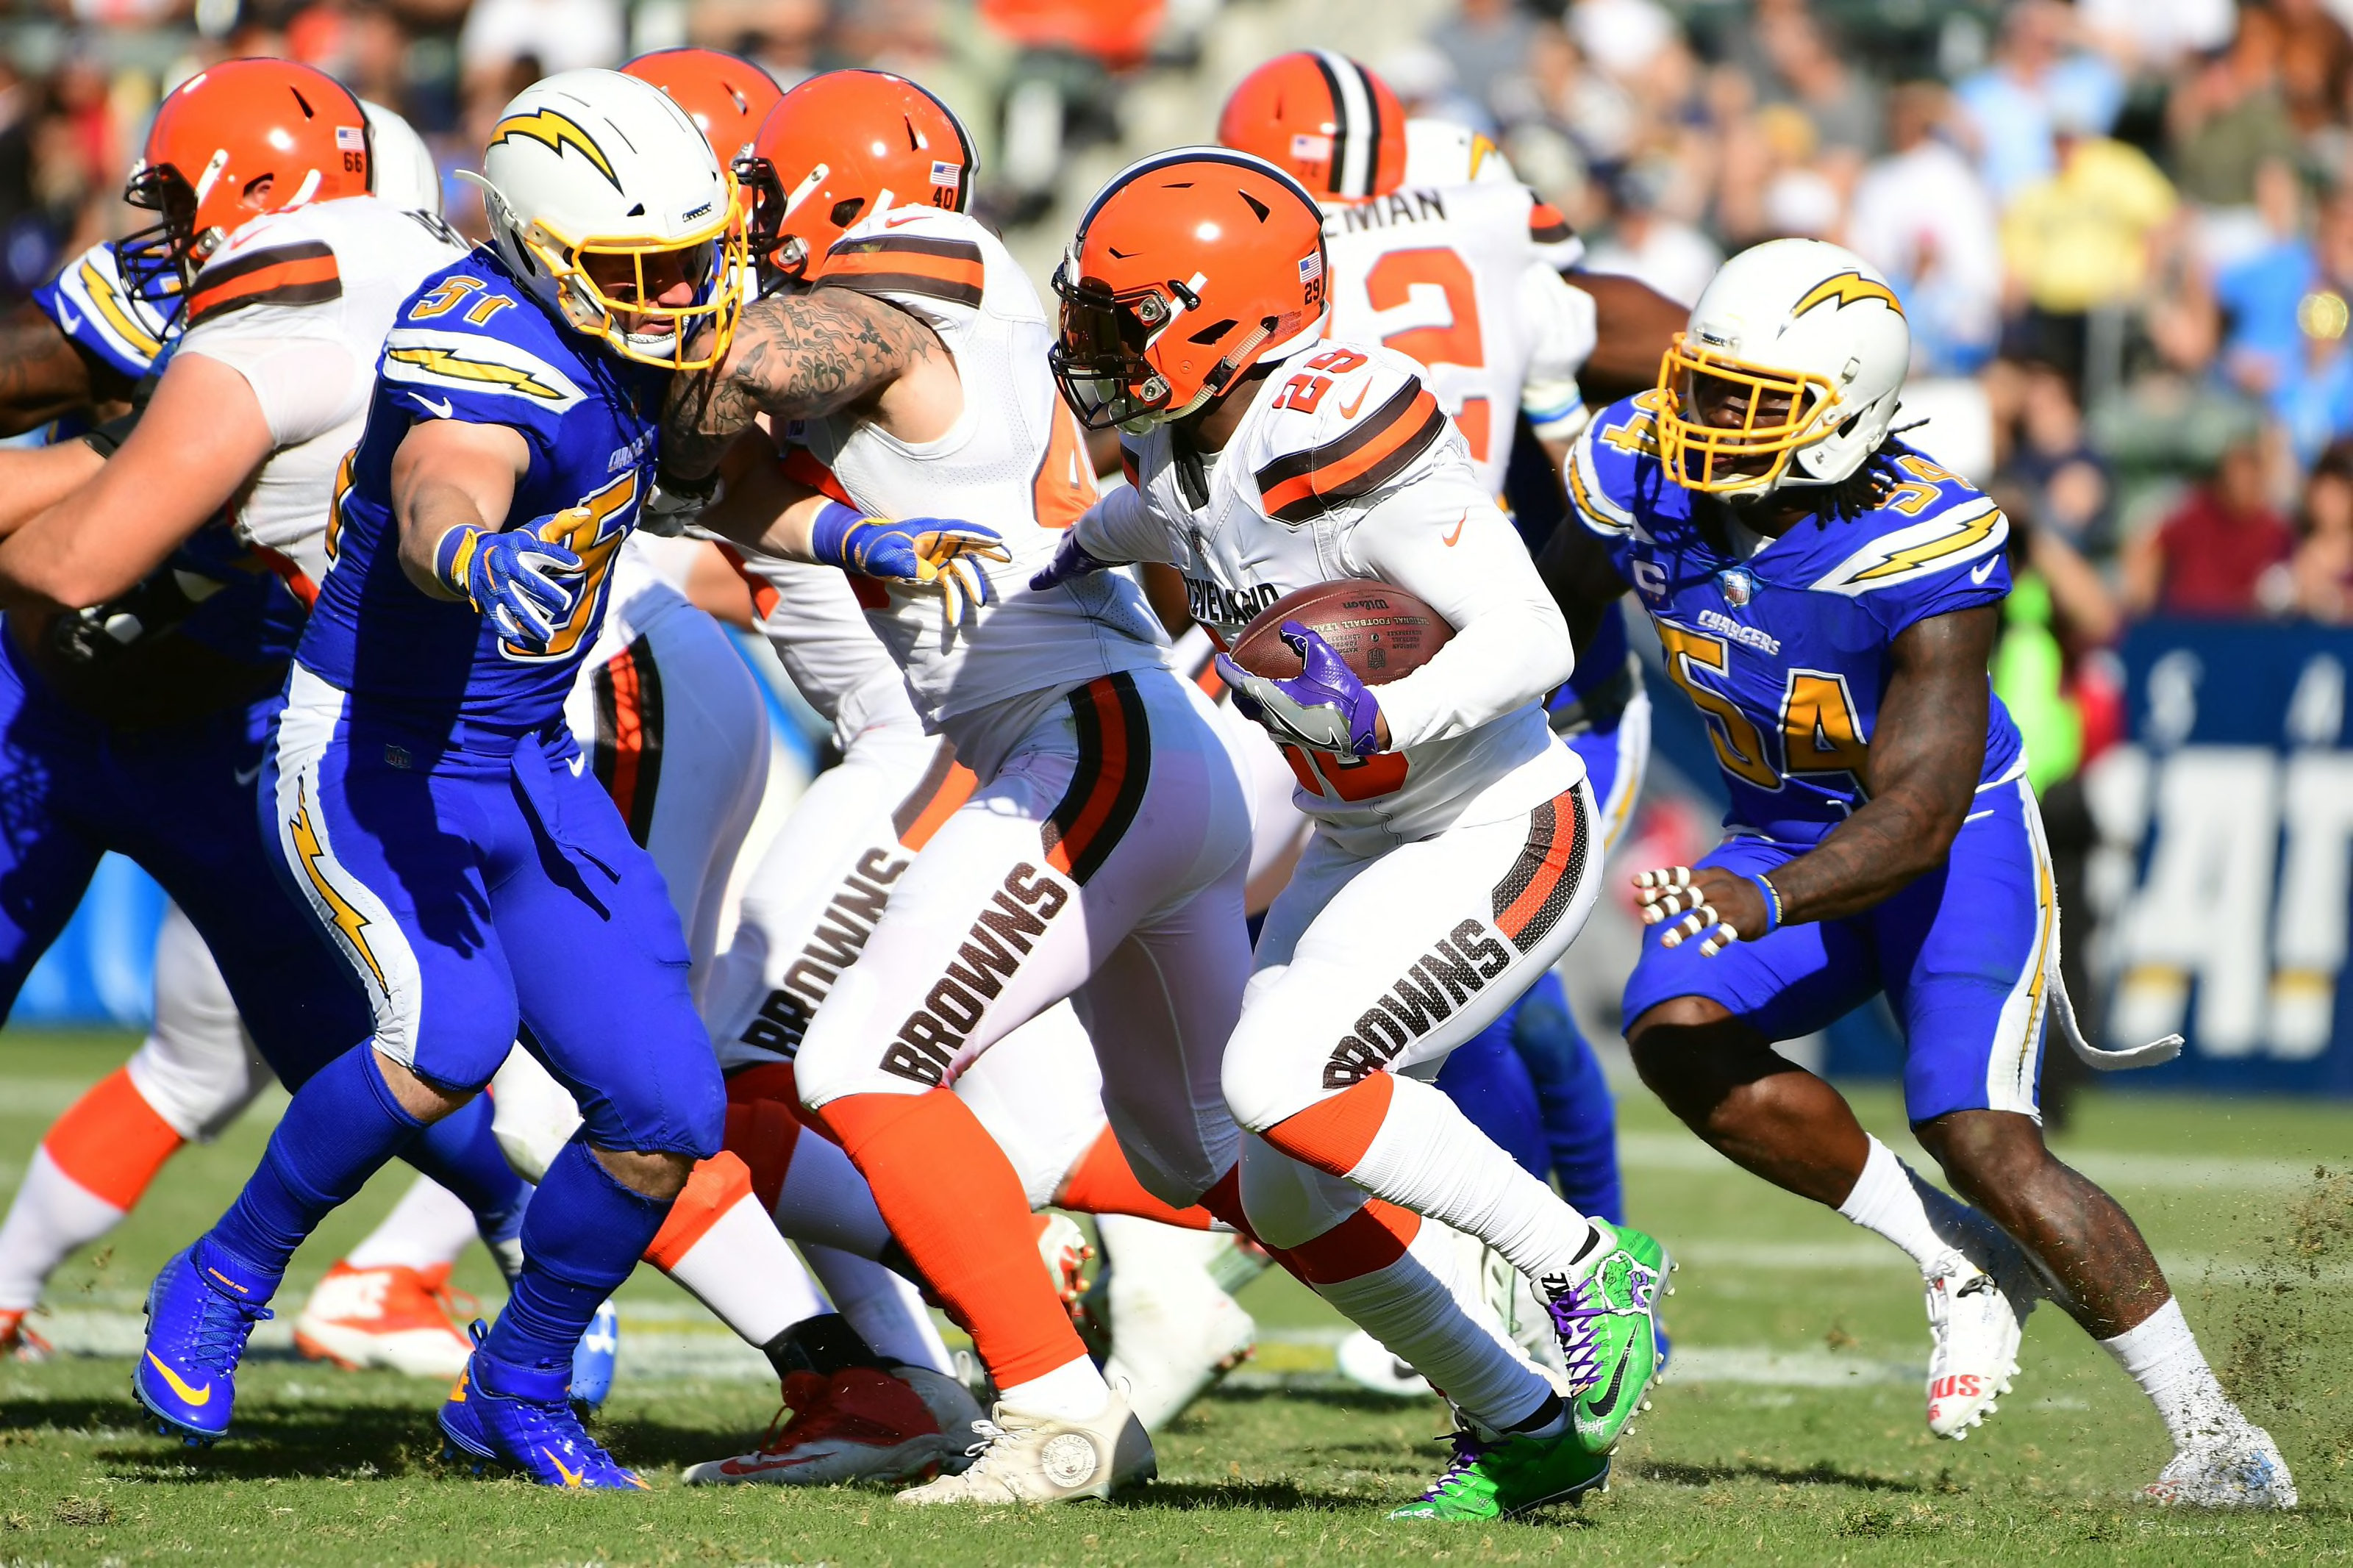 Cleveland Browns vs Chargers Predictions: Looking to stay undefeated at home